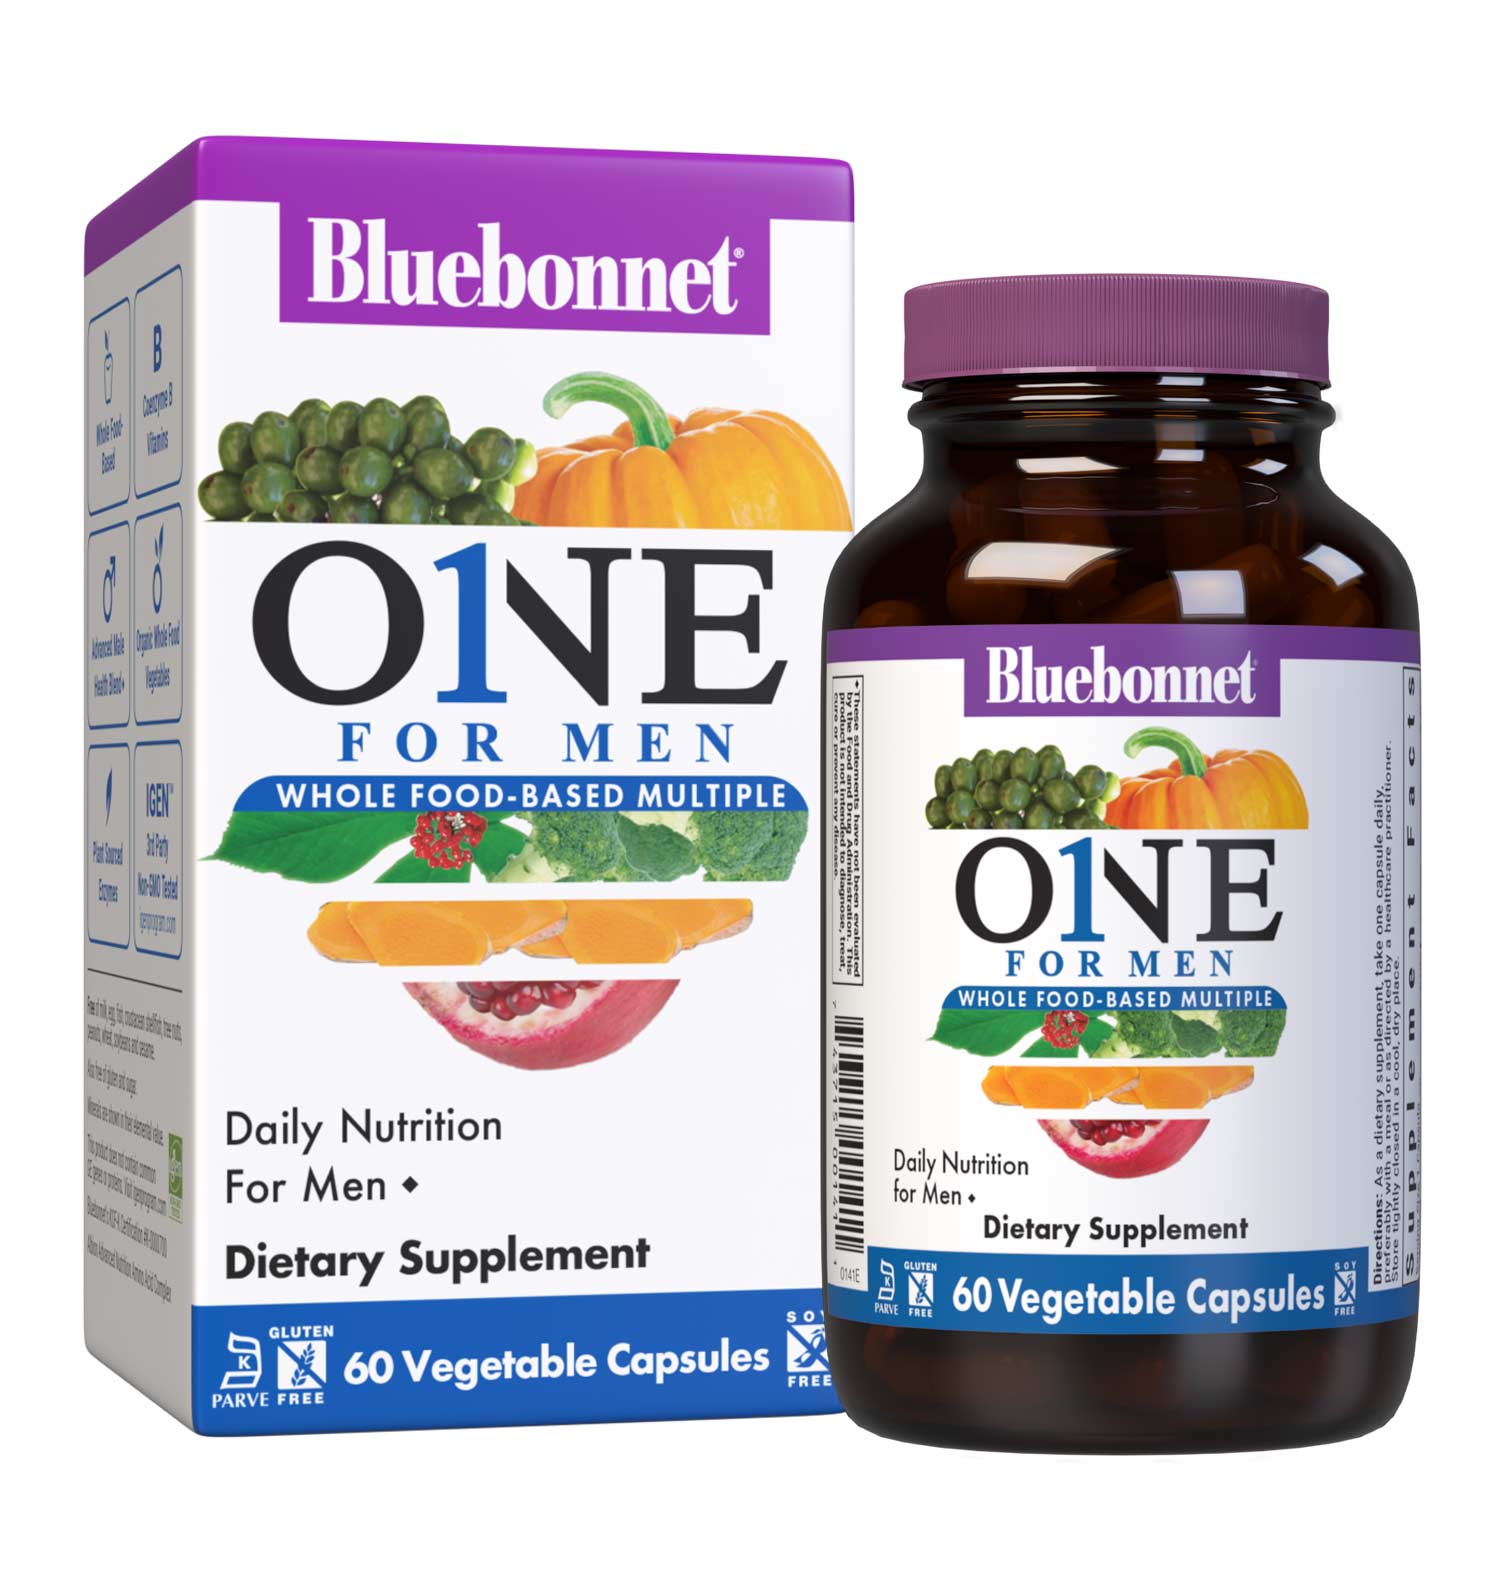 Bluebonnet’s Men's One Whole Food-Based Multiple 60 vegetable capsules is formulated with over 25 crucial nutrients like vitamin K2 and vitamin E from sunflower, all the coenzyme forms of the B vitamins, plus Albion chelated minerals in addition to an organic whole food vegetable blend, a plant-sourced enzyme blend, and a unique male health blend for daily nutrition and well being. Bottle with box. #size_60 count